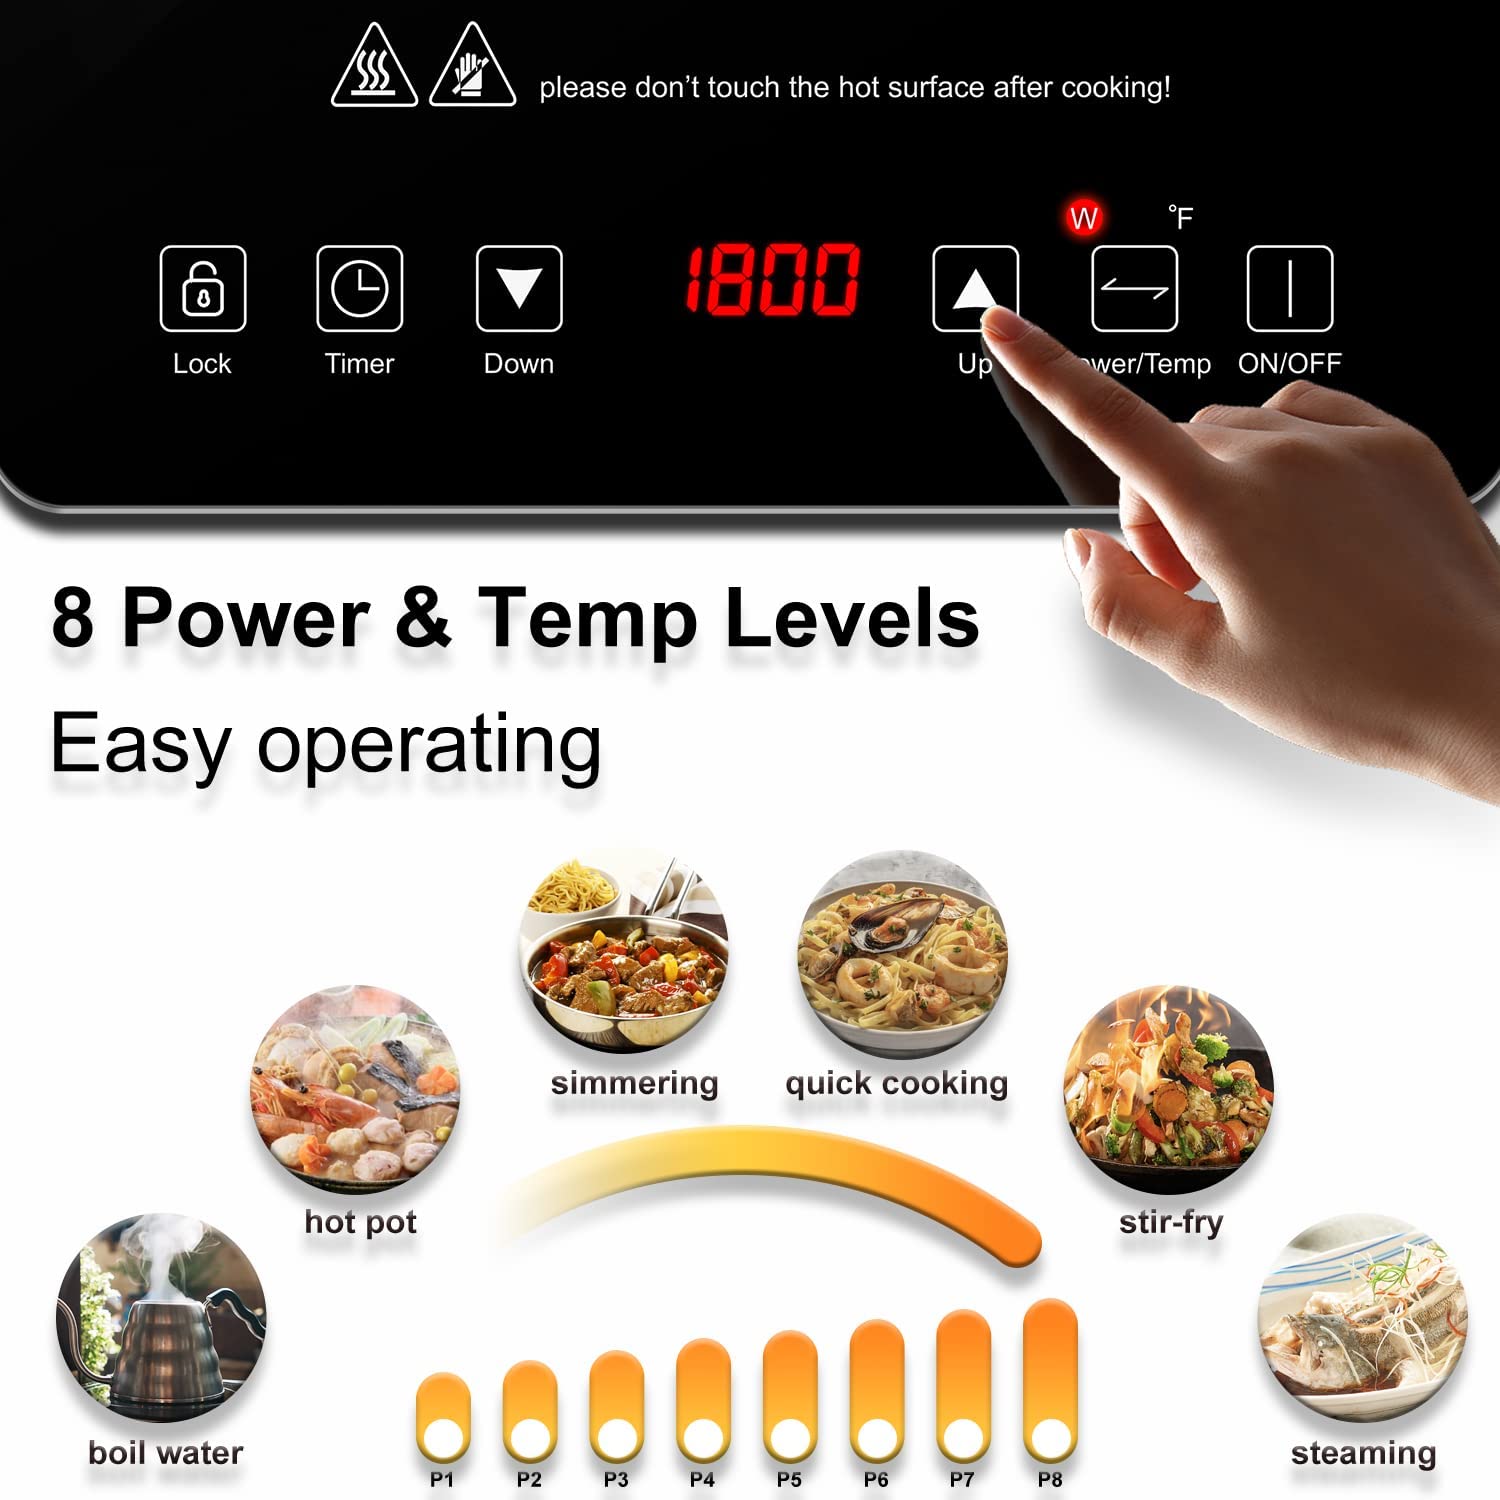 AMZCHEF Portable Induction Cooktop with 1800W Sensor Touch